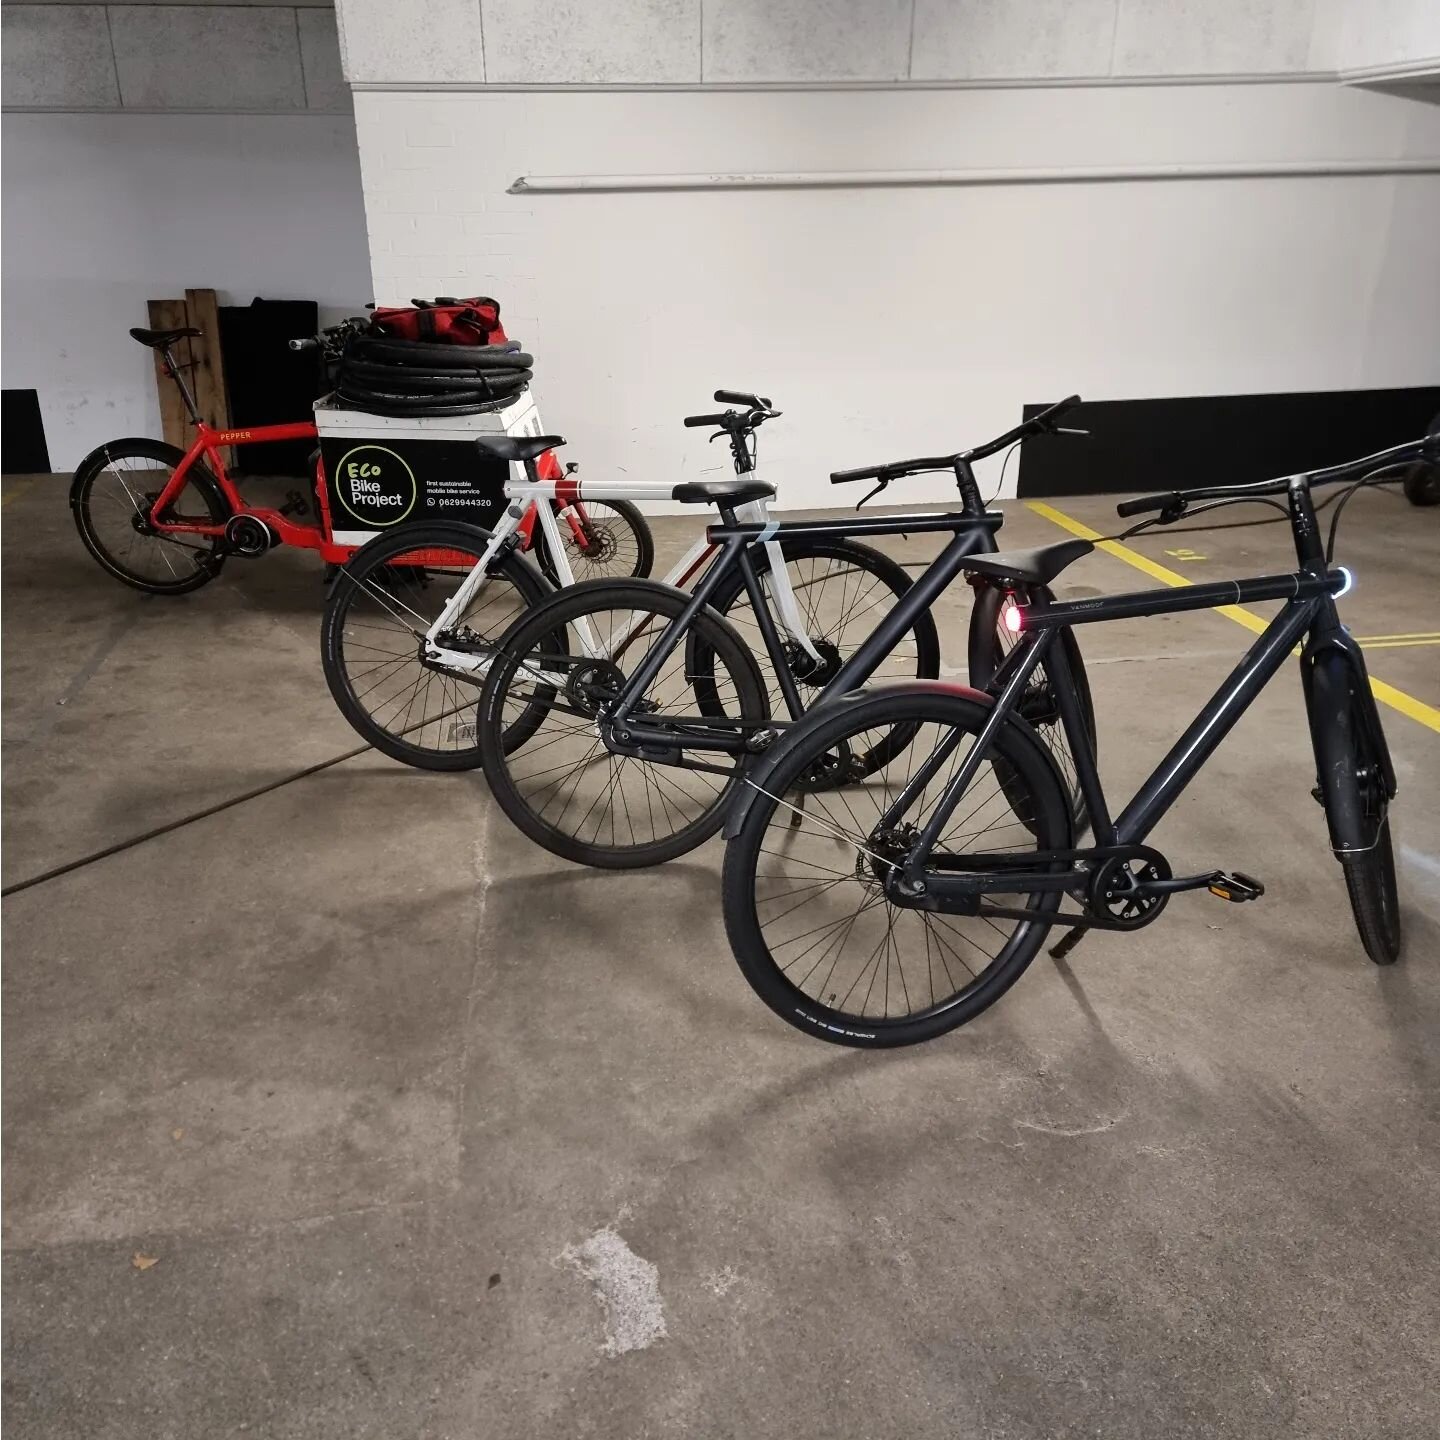 Yes, we fix Vanmoof !!!

We are providing complete mechanical services of the Vanmoof bikes  at the location within max 48h.